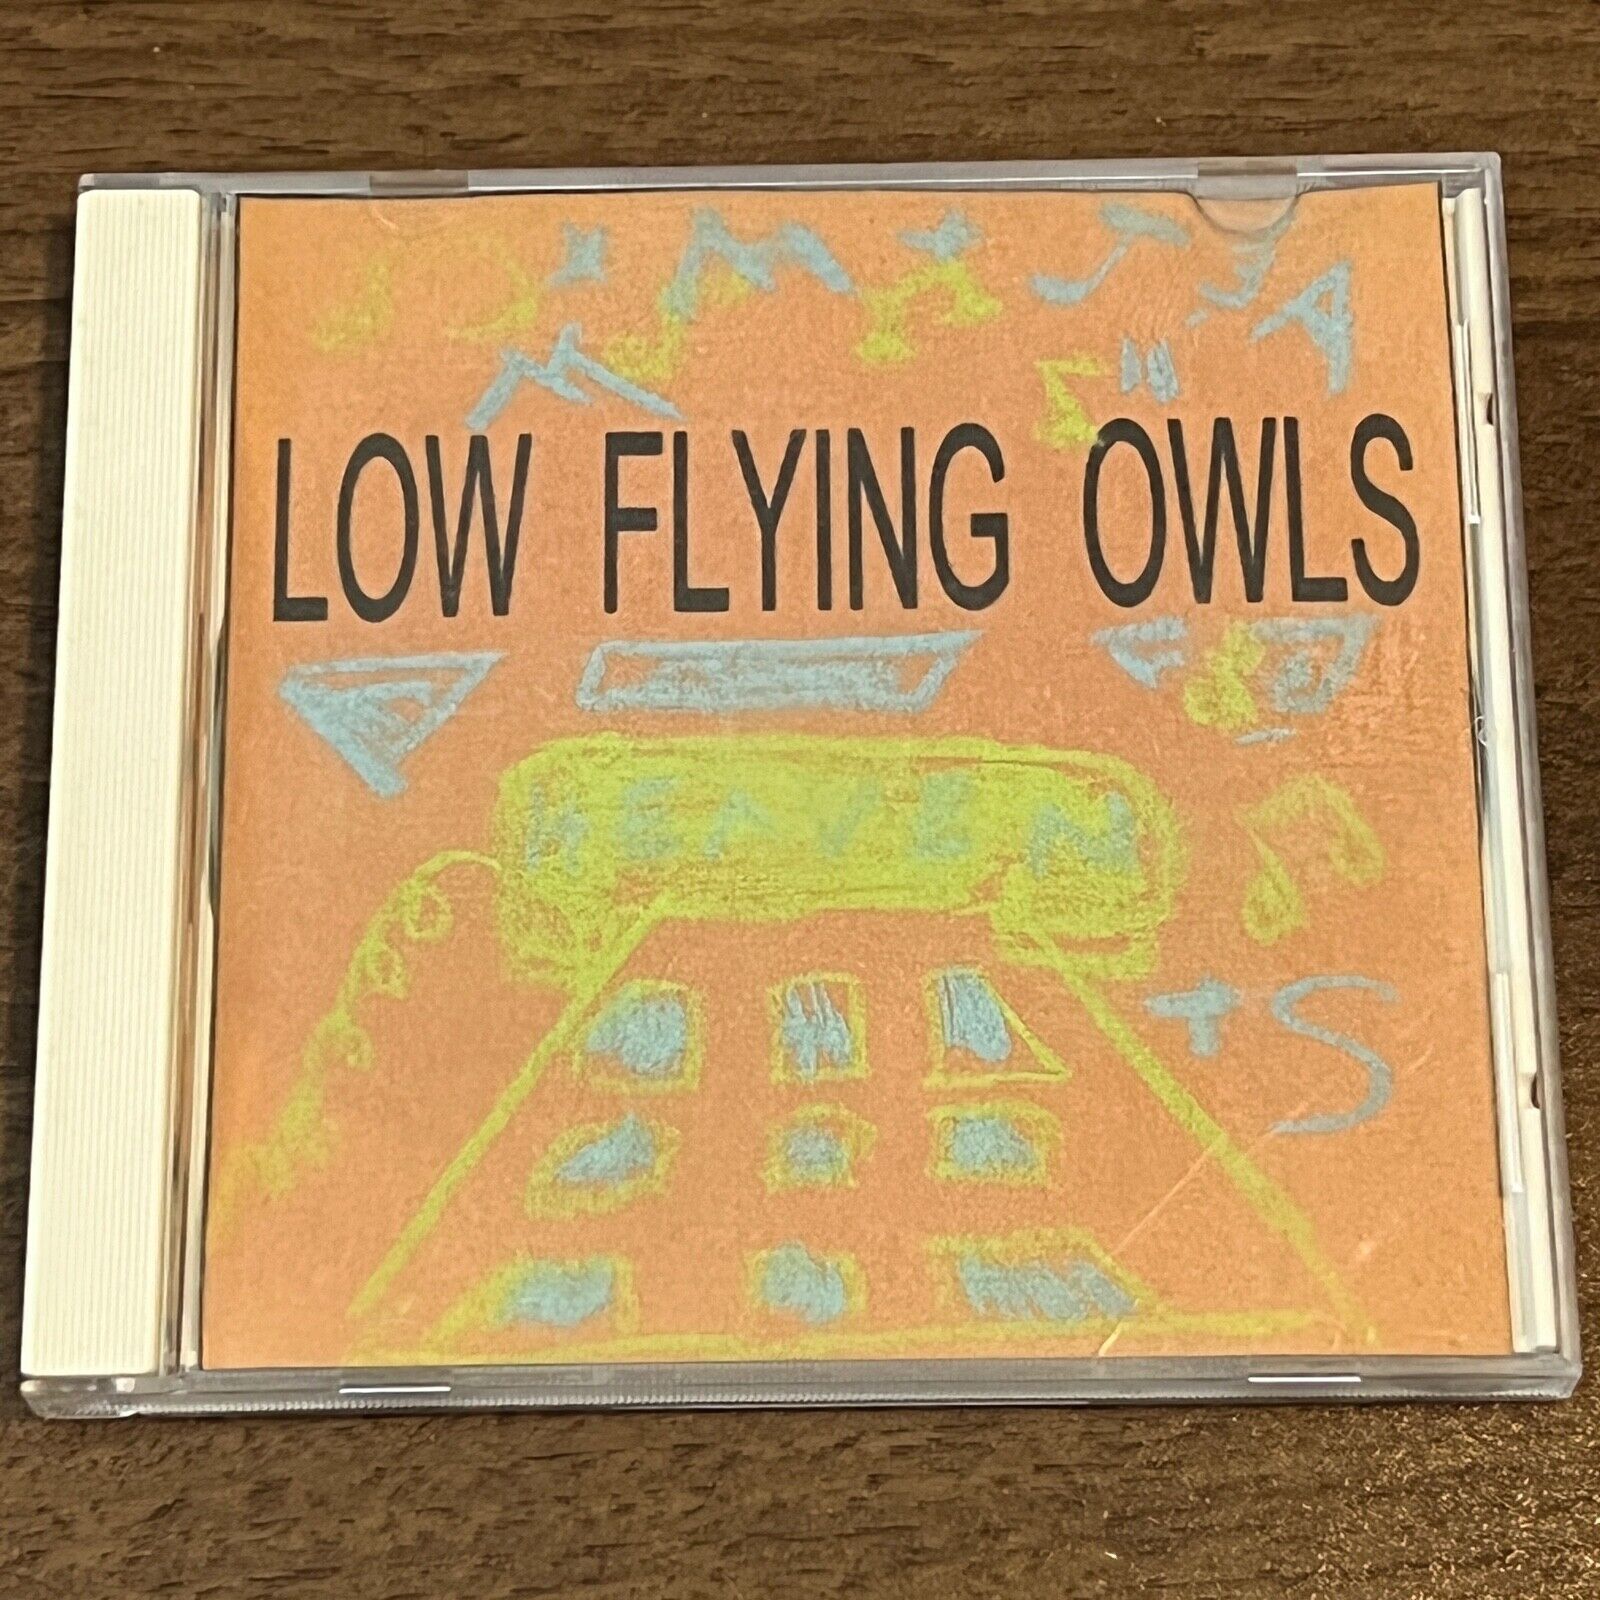 LOW FLYING OWLS - Postcard From New York, Man of Glass, Delilah - AUTOGRAPHED CD